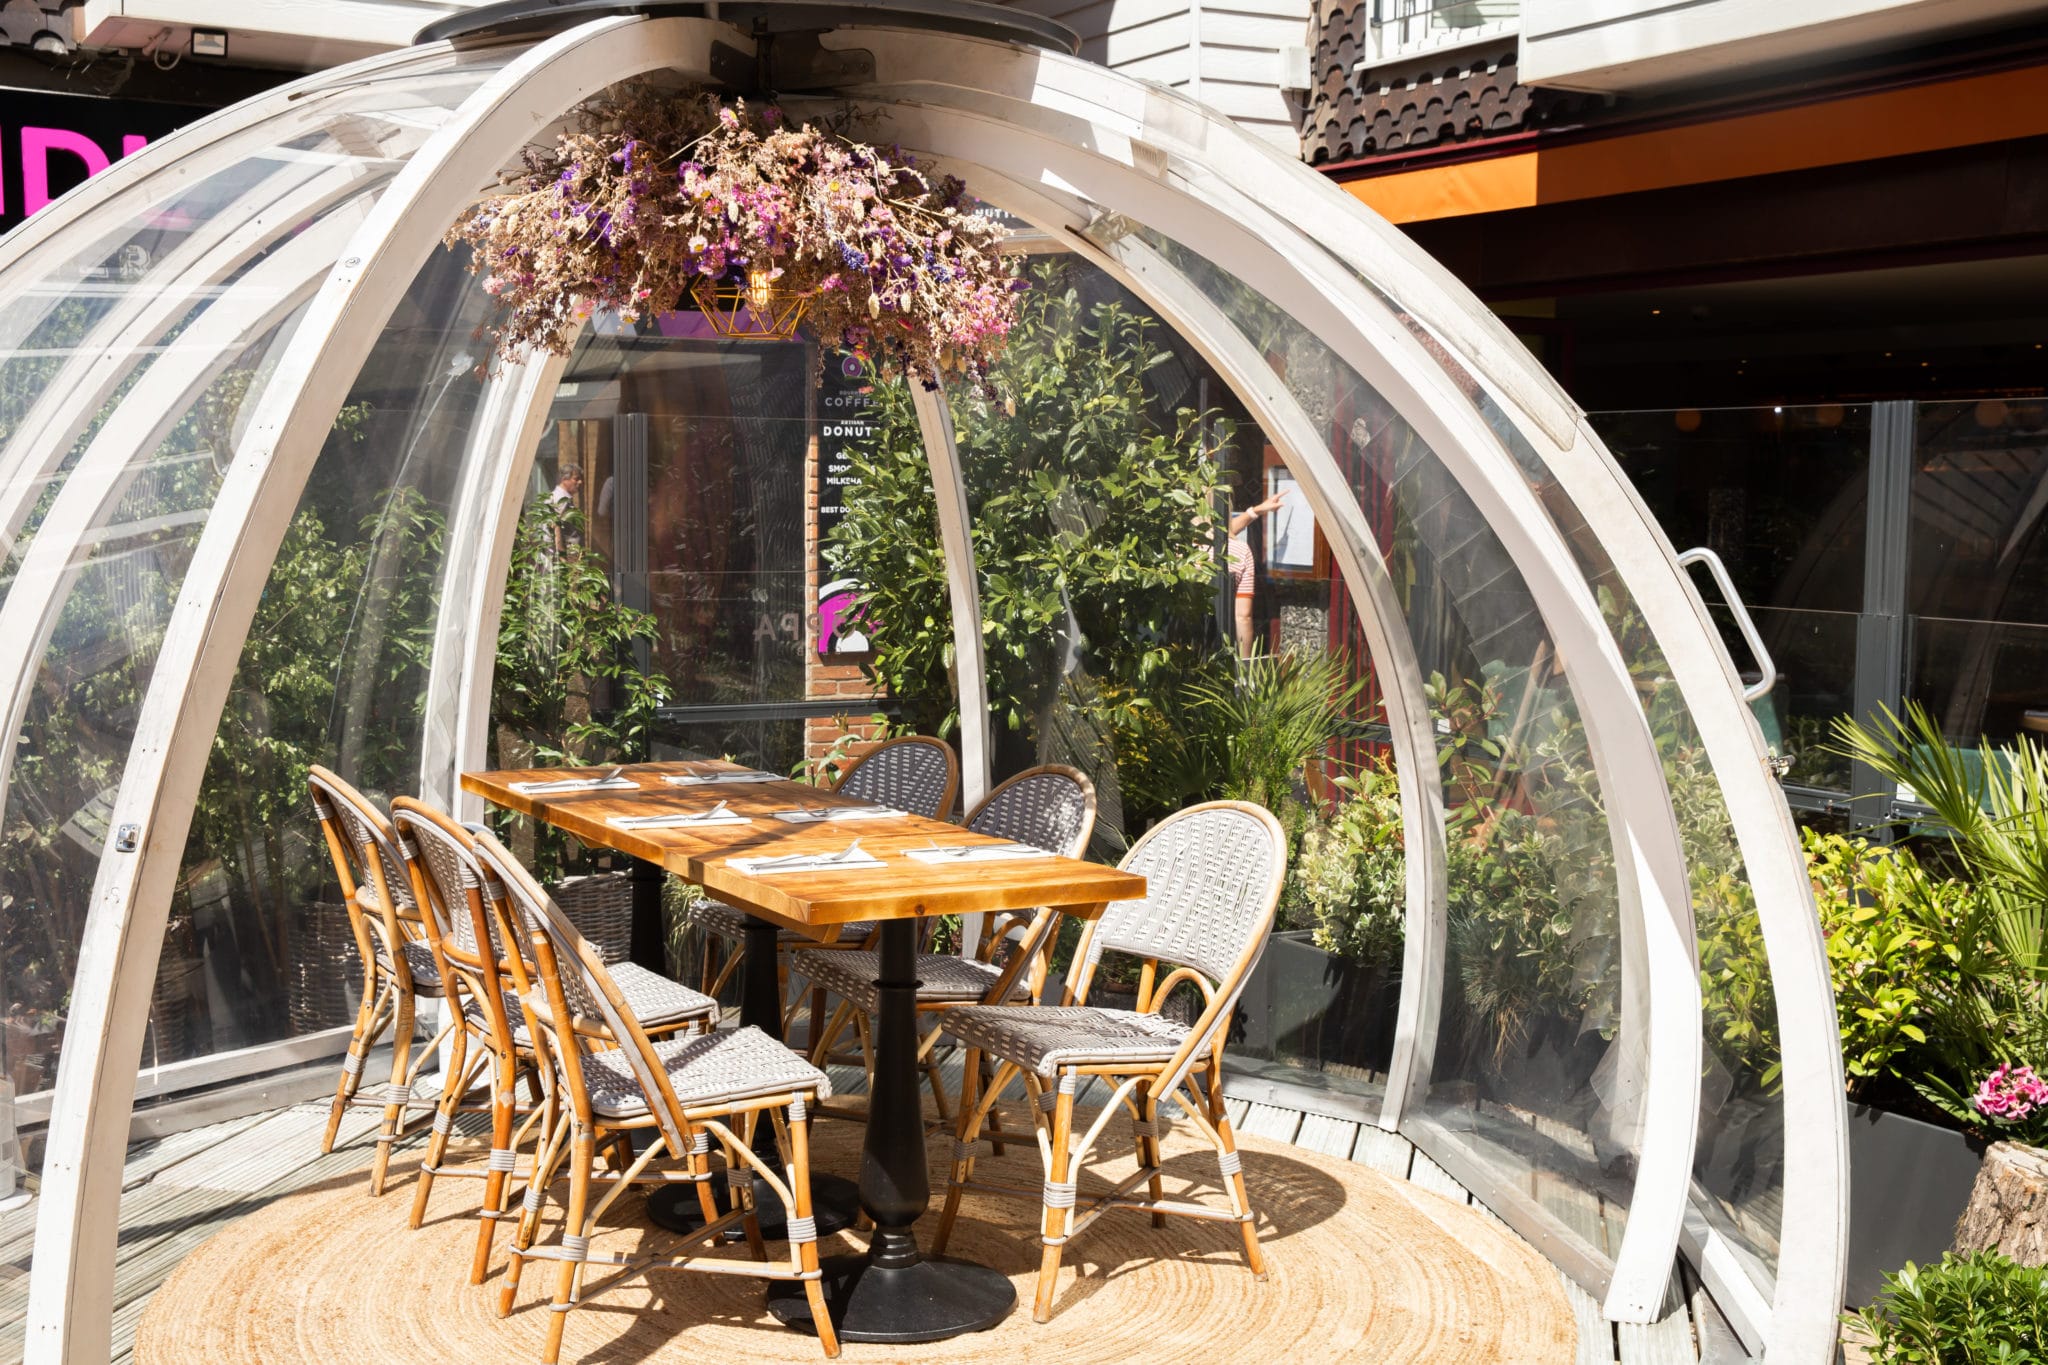 Alfresco dining in a globe style pod with a wooden table and chairs inside the pod on a sunny day